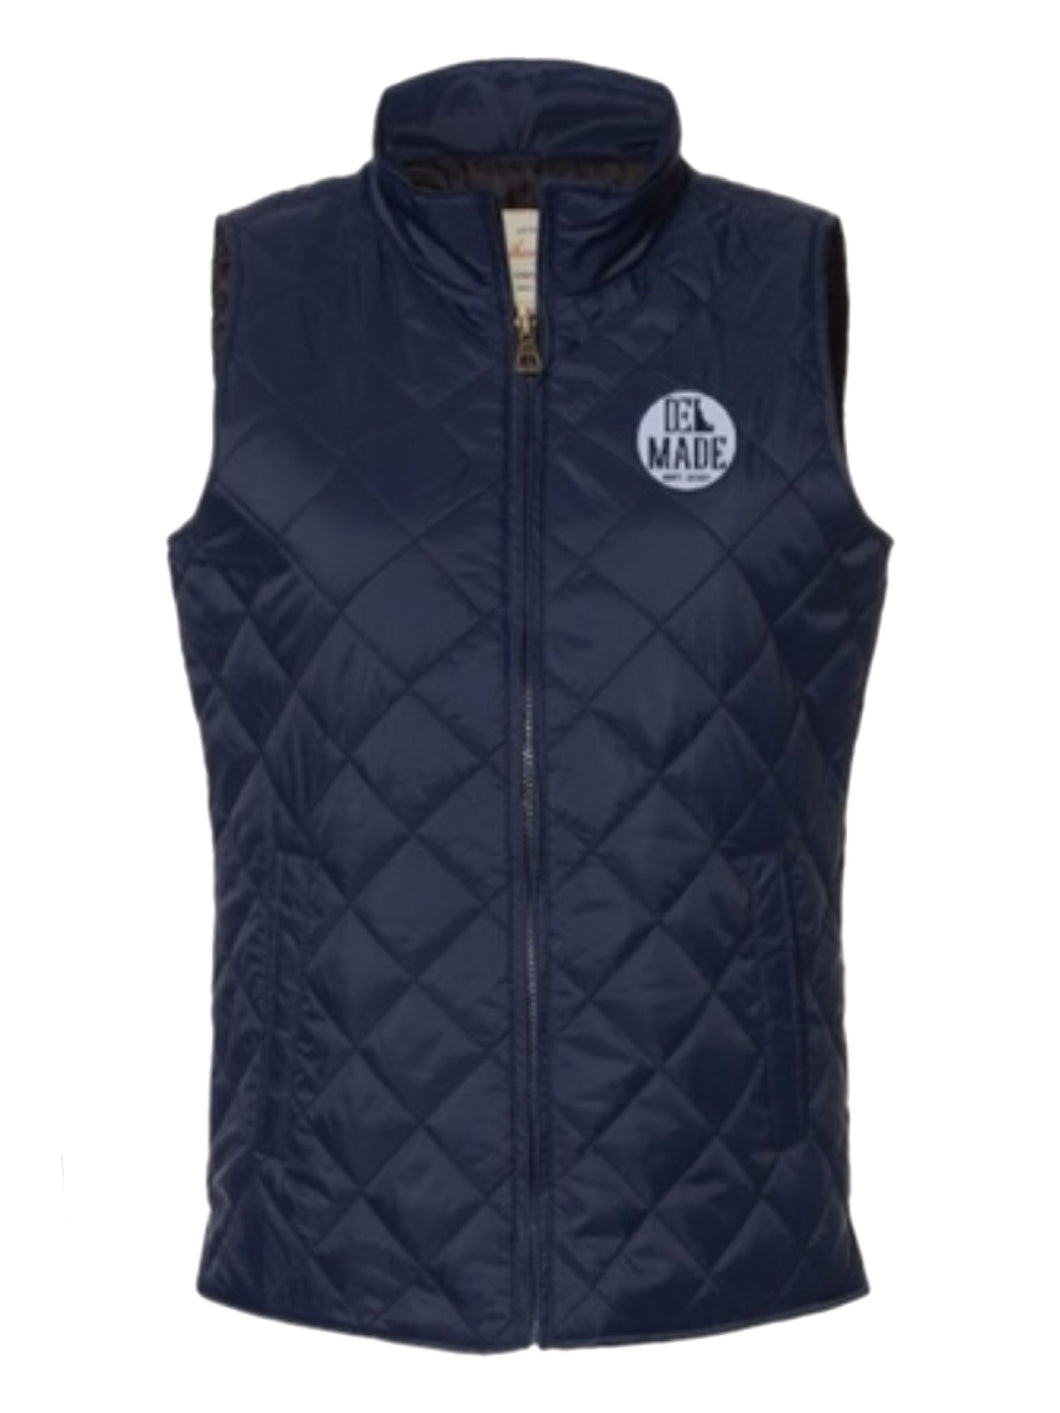 DEL Made Women’s Vintage Diamond Quilted Vest